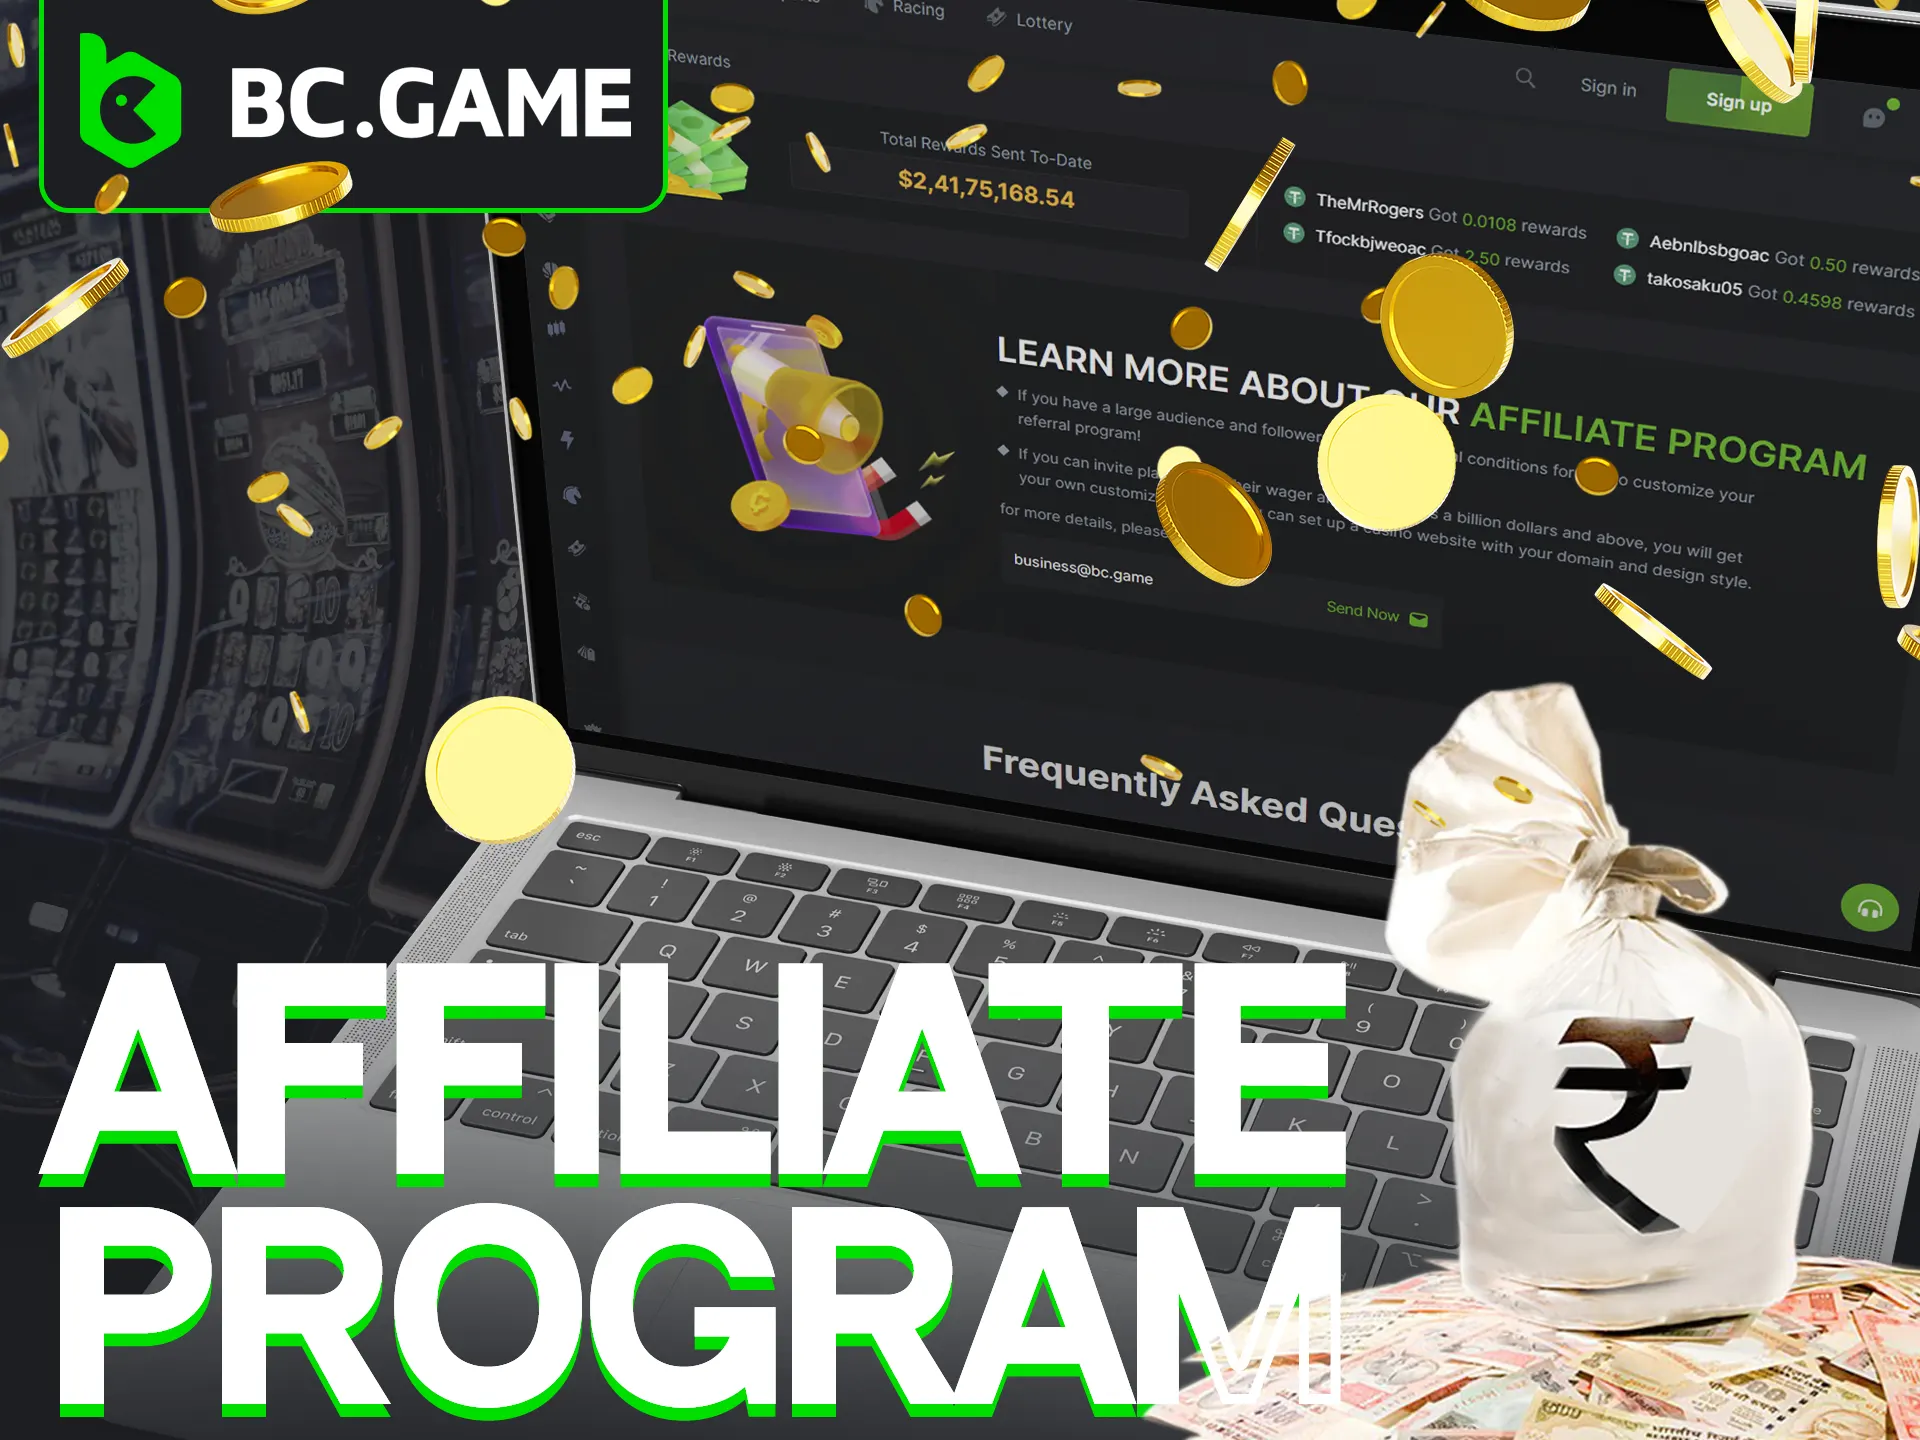 Join BC.Game's affiliate program for rewards and benefits.